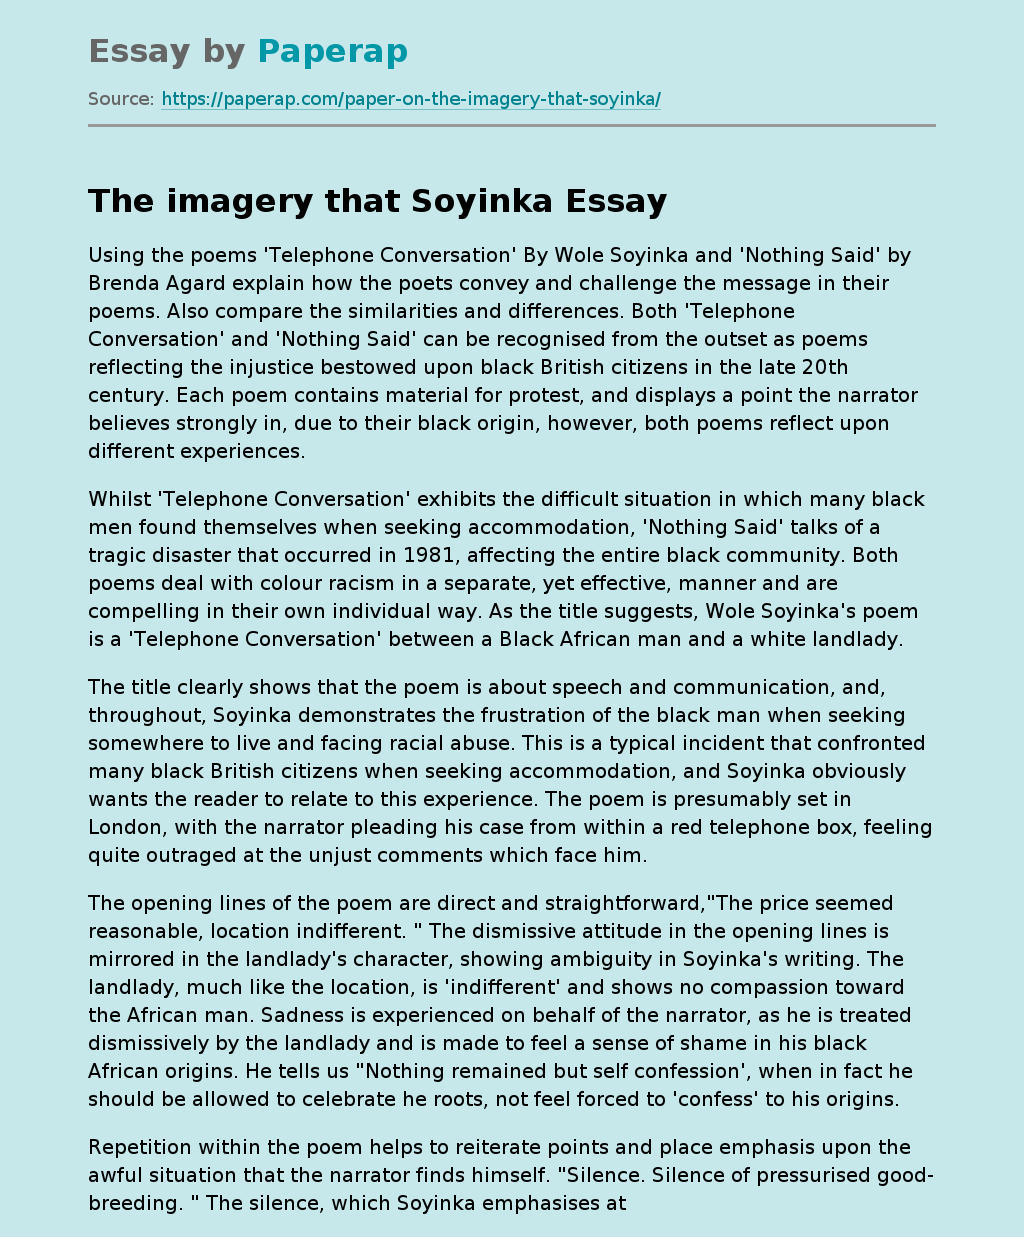 The imagery that Soyinka